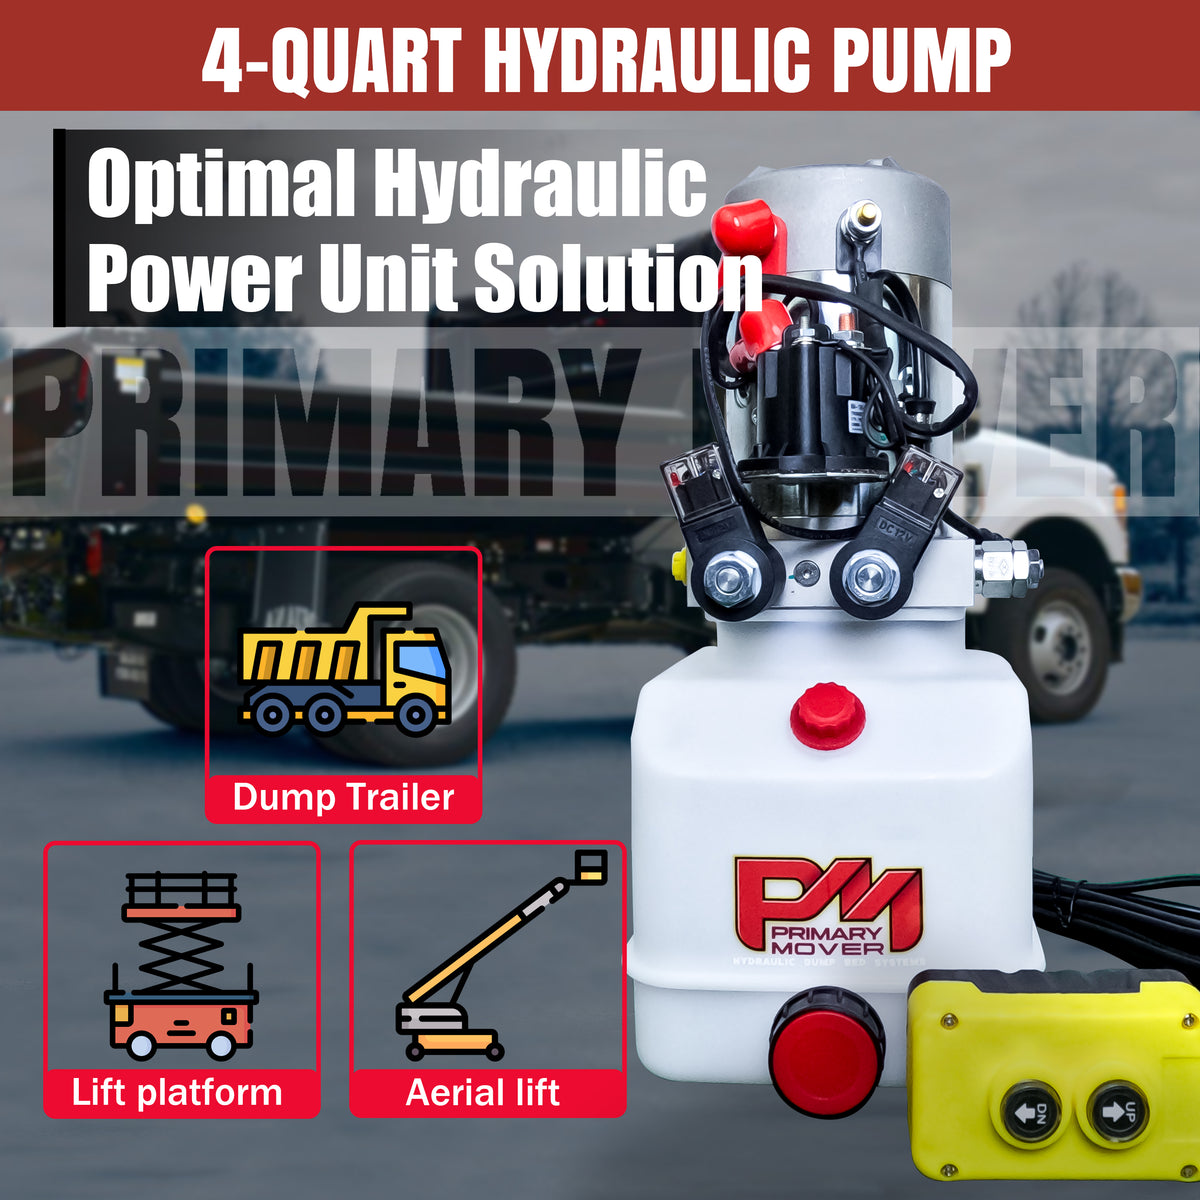 Primary Mover 12V Double-Acting Hydraulic Pump - Precision-crafted for hydraulic dump bed systems. Dual-acting functionality, quality craftsmanship, and cost-effective reliability. Elevate your operations effortlessly.